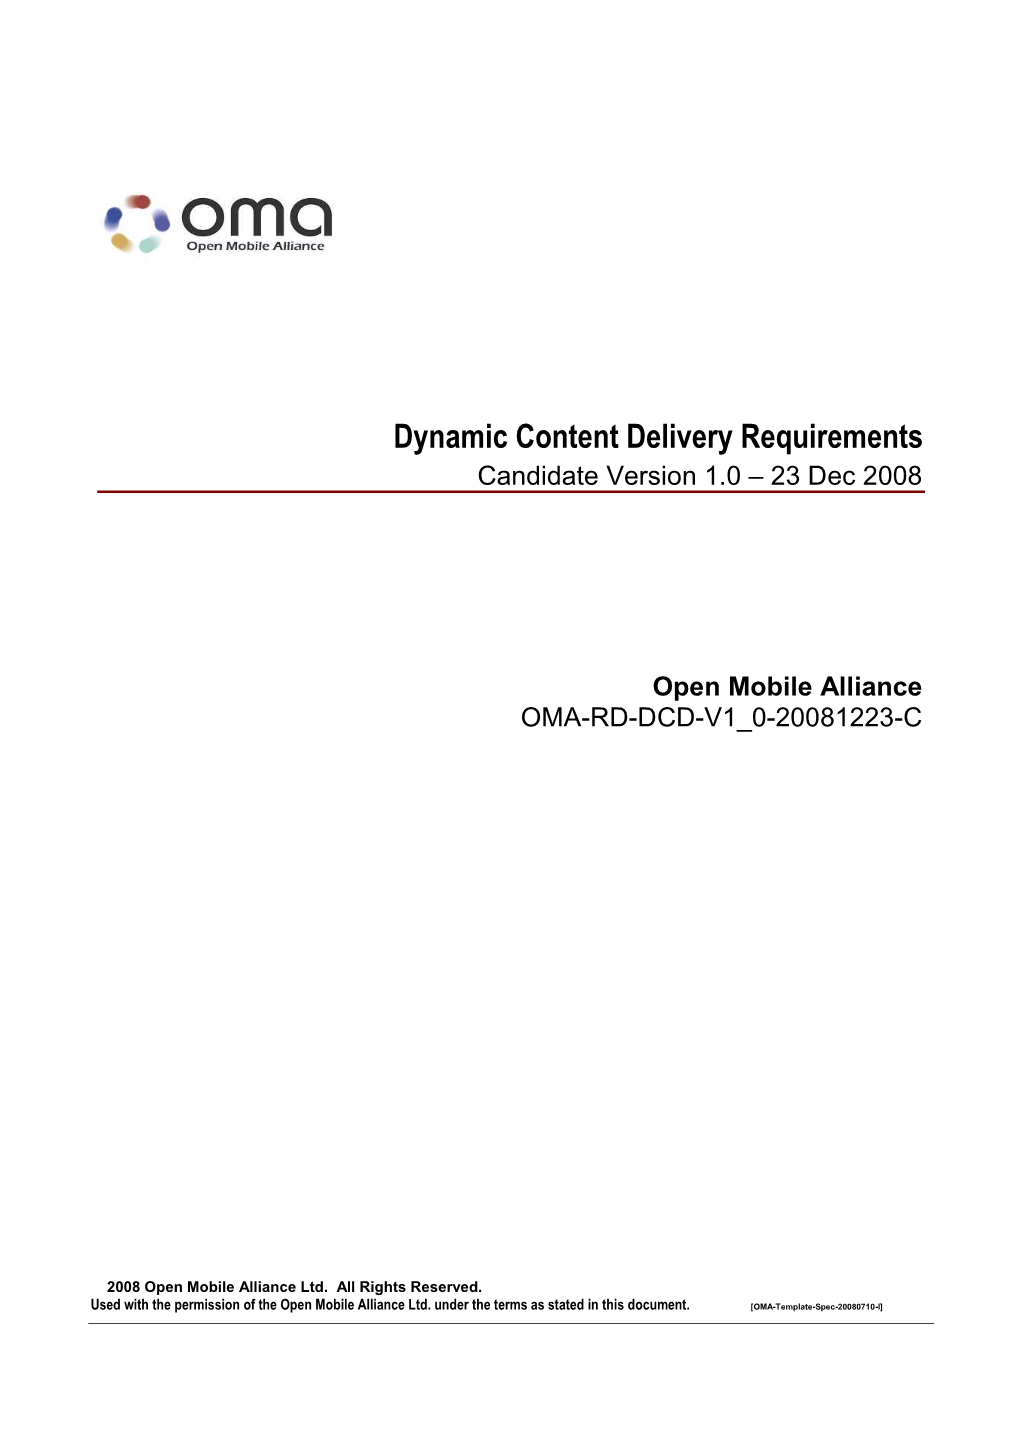 Dynamic Content Delivery Requirements Candidate Version 1.0 – 23 Dec 2008